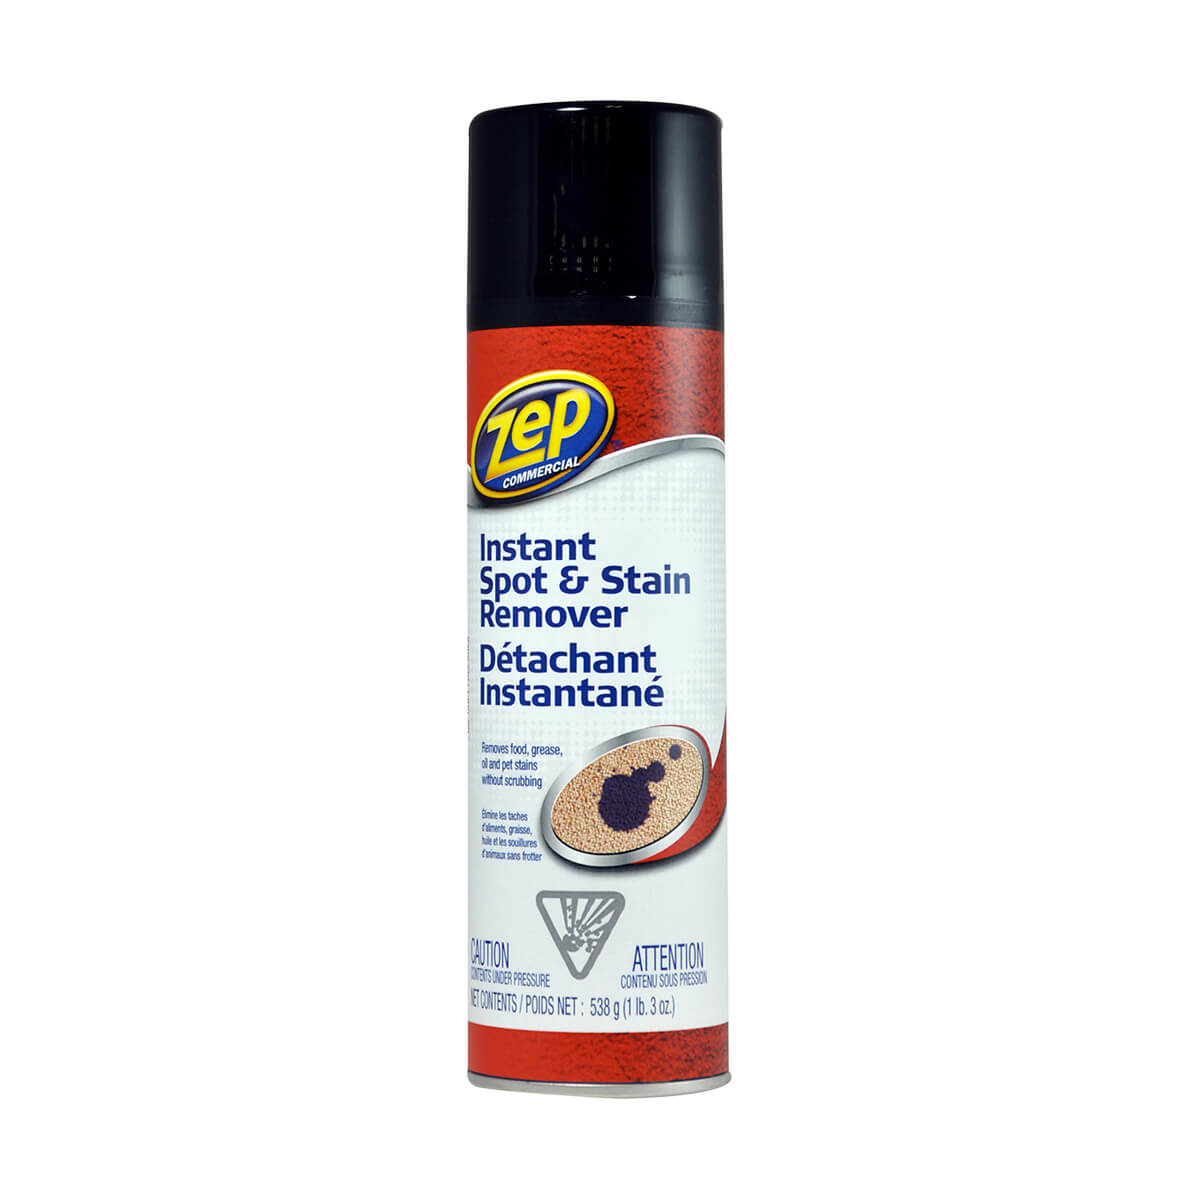 Zep Commercial Instant Spot & Stain Remover - 538 g